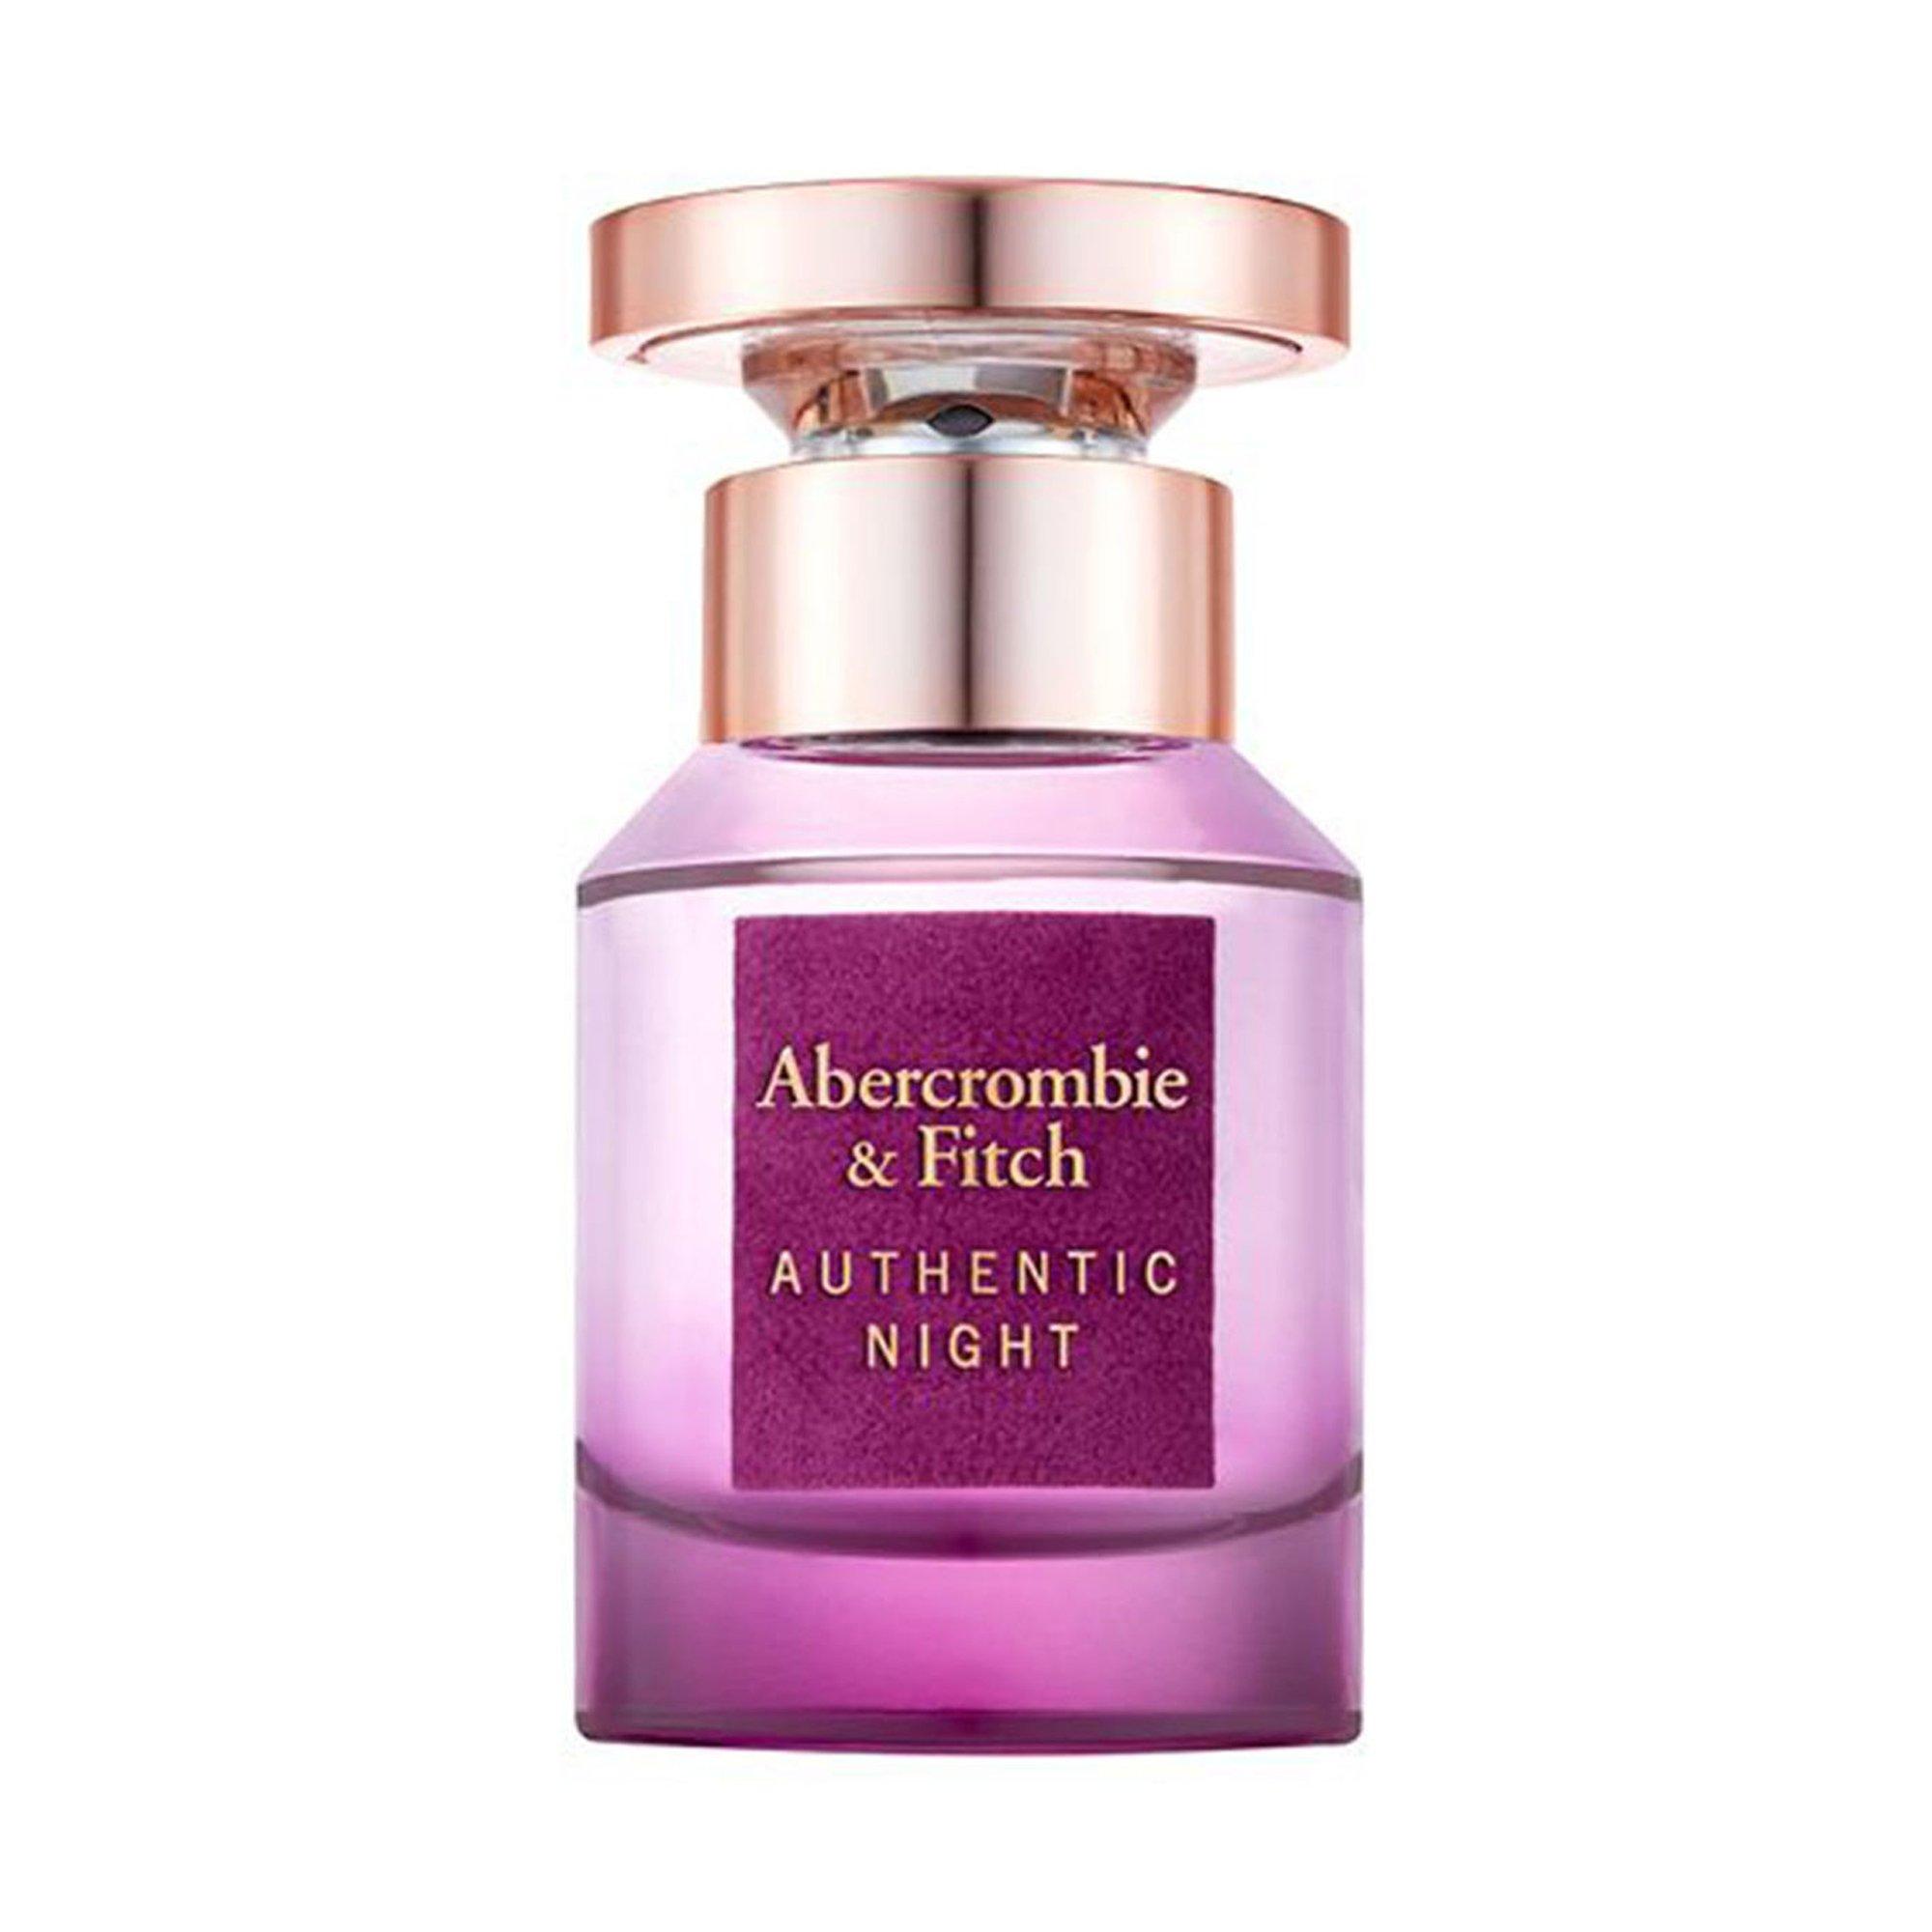 Abercrombie & Fitch Authentic Night AUTHENTIC Night Femme Perfume Femme 30 ml